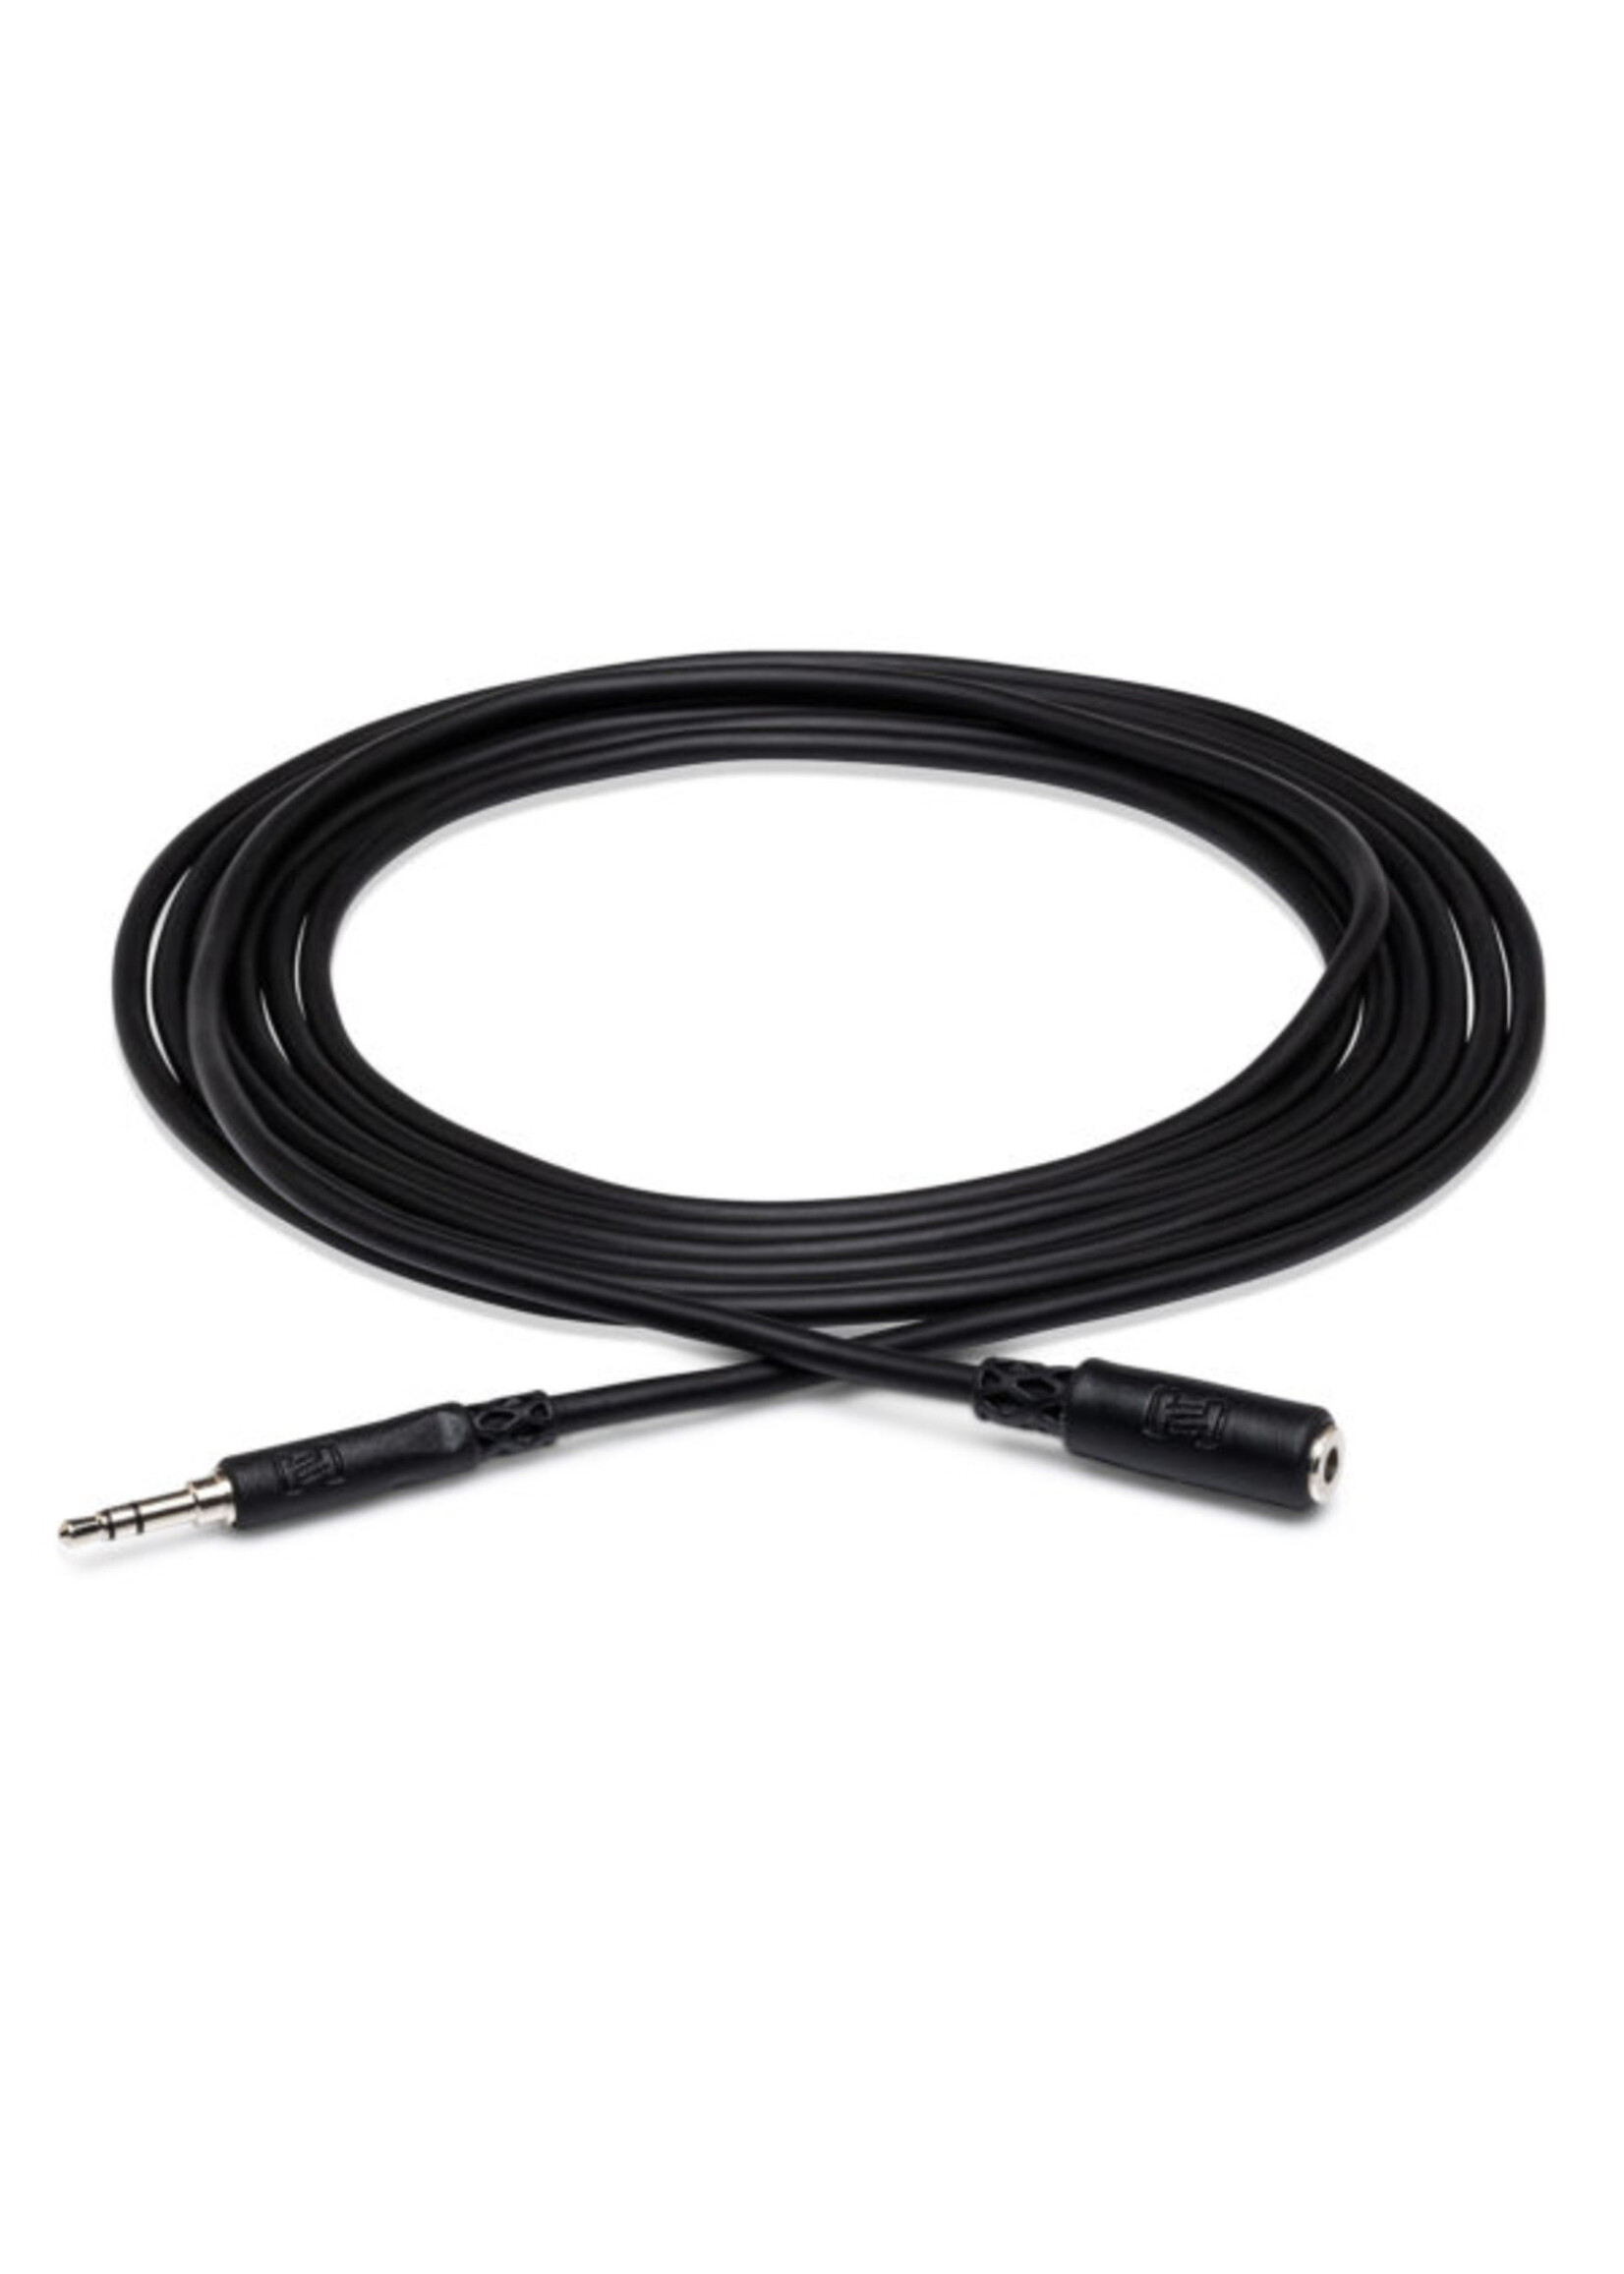 MHE-110 HEADPHONE EXTENSION CABLE